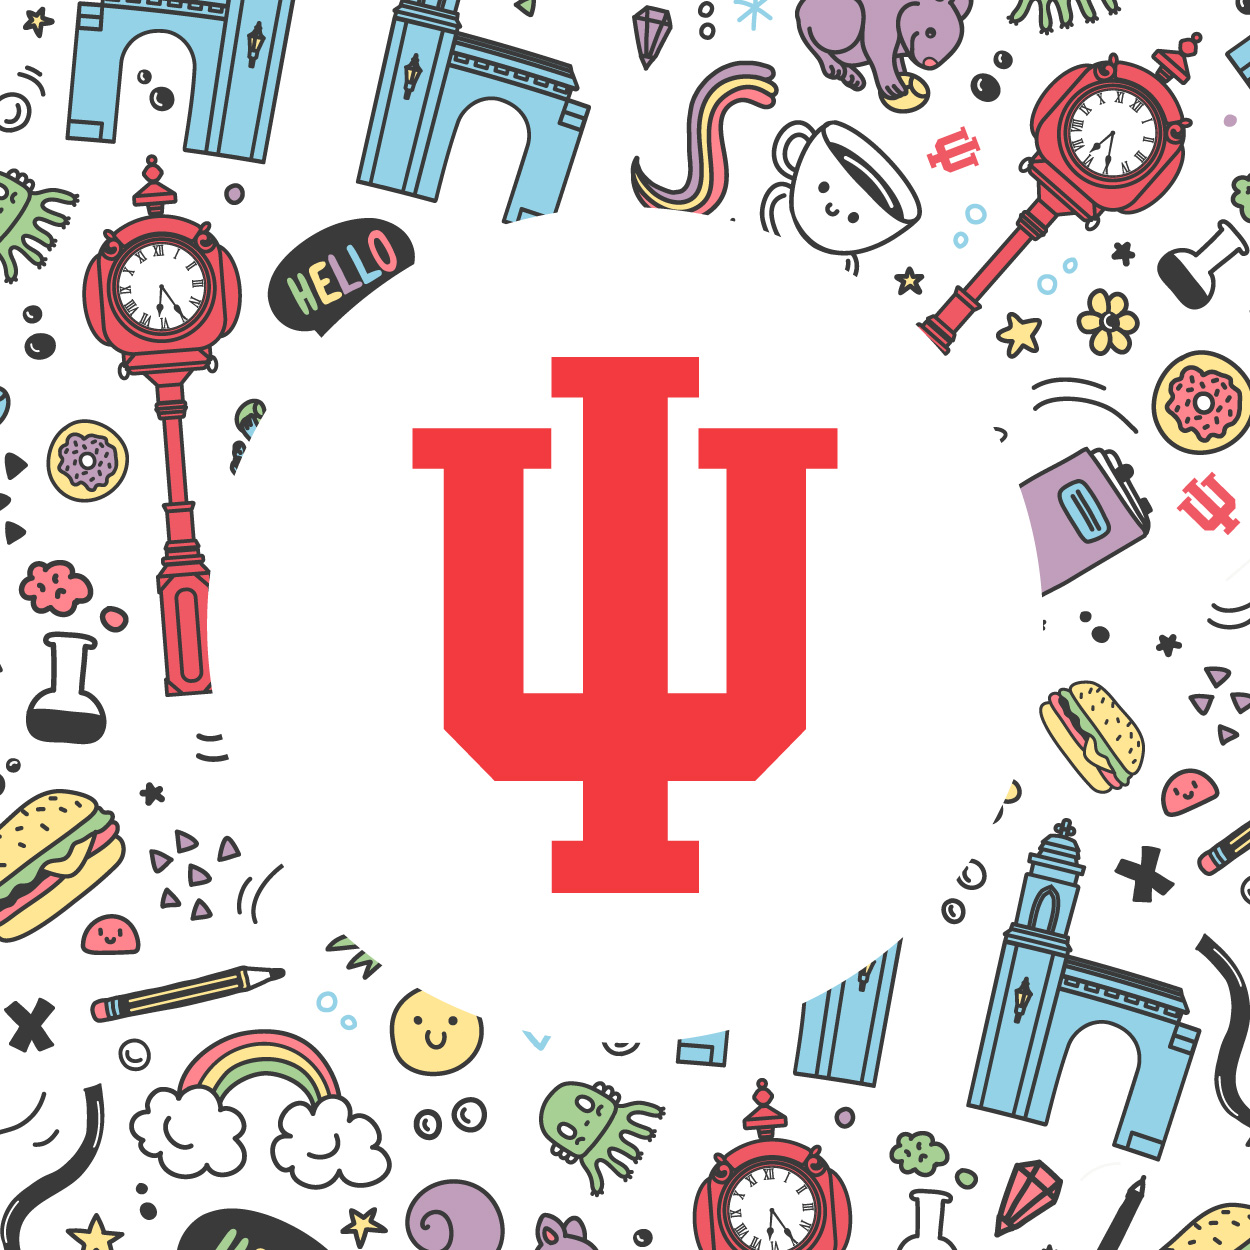 Download the IU Doodle Profile background